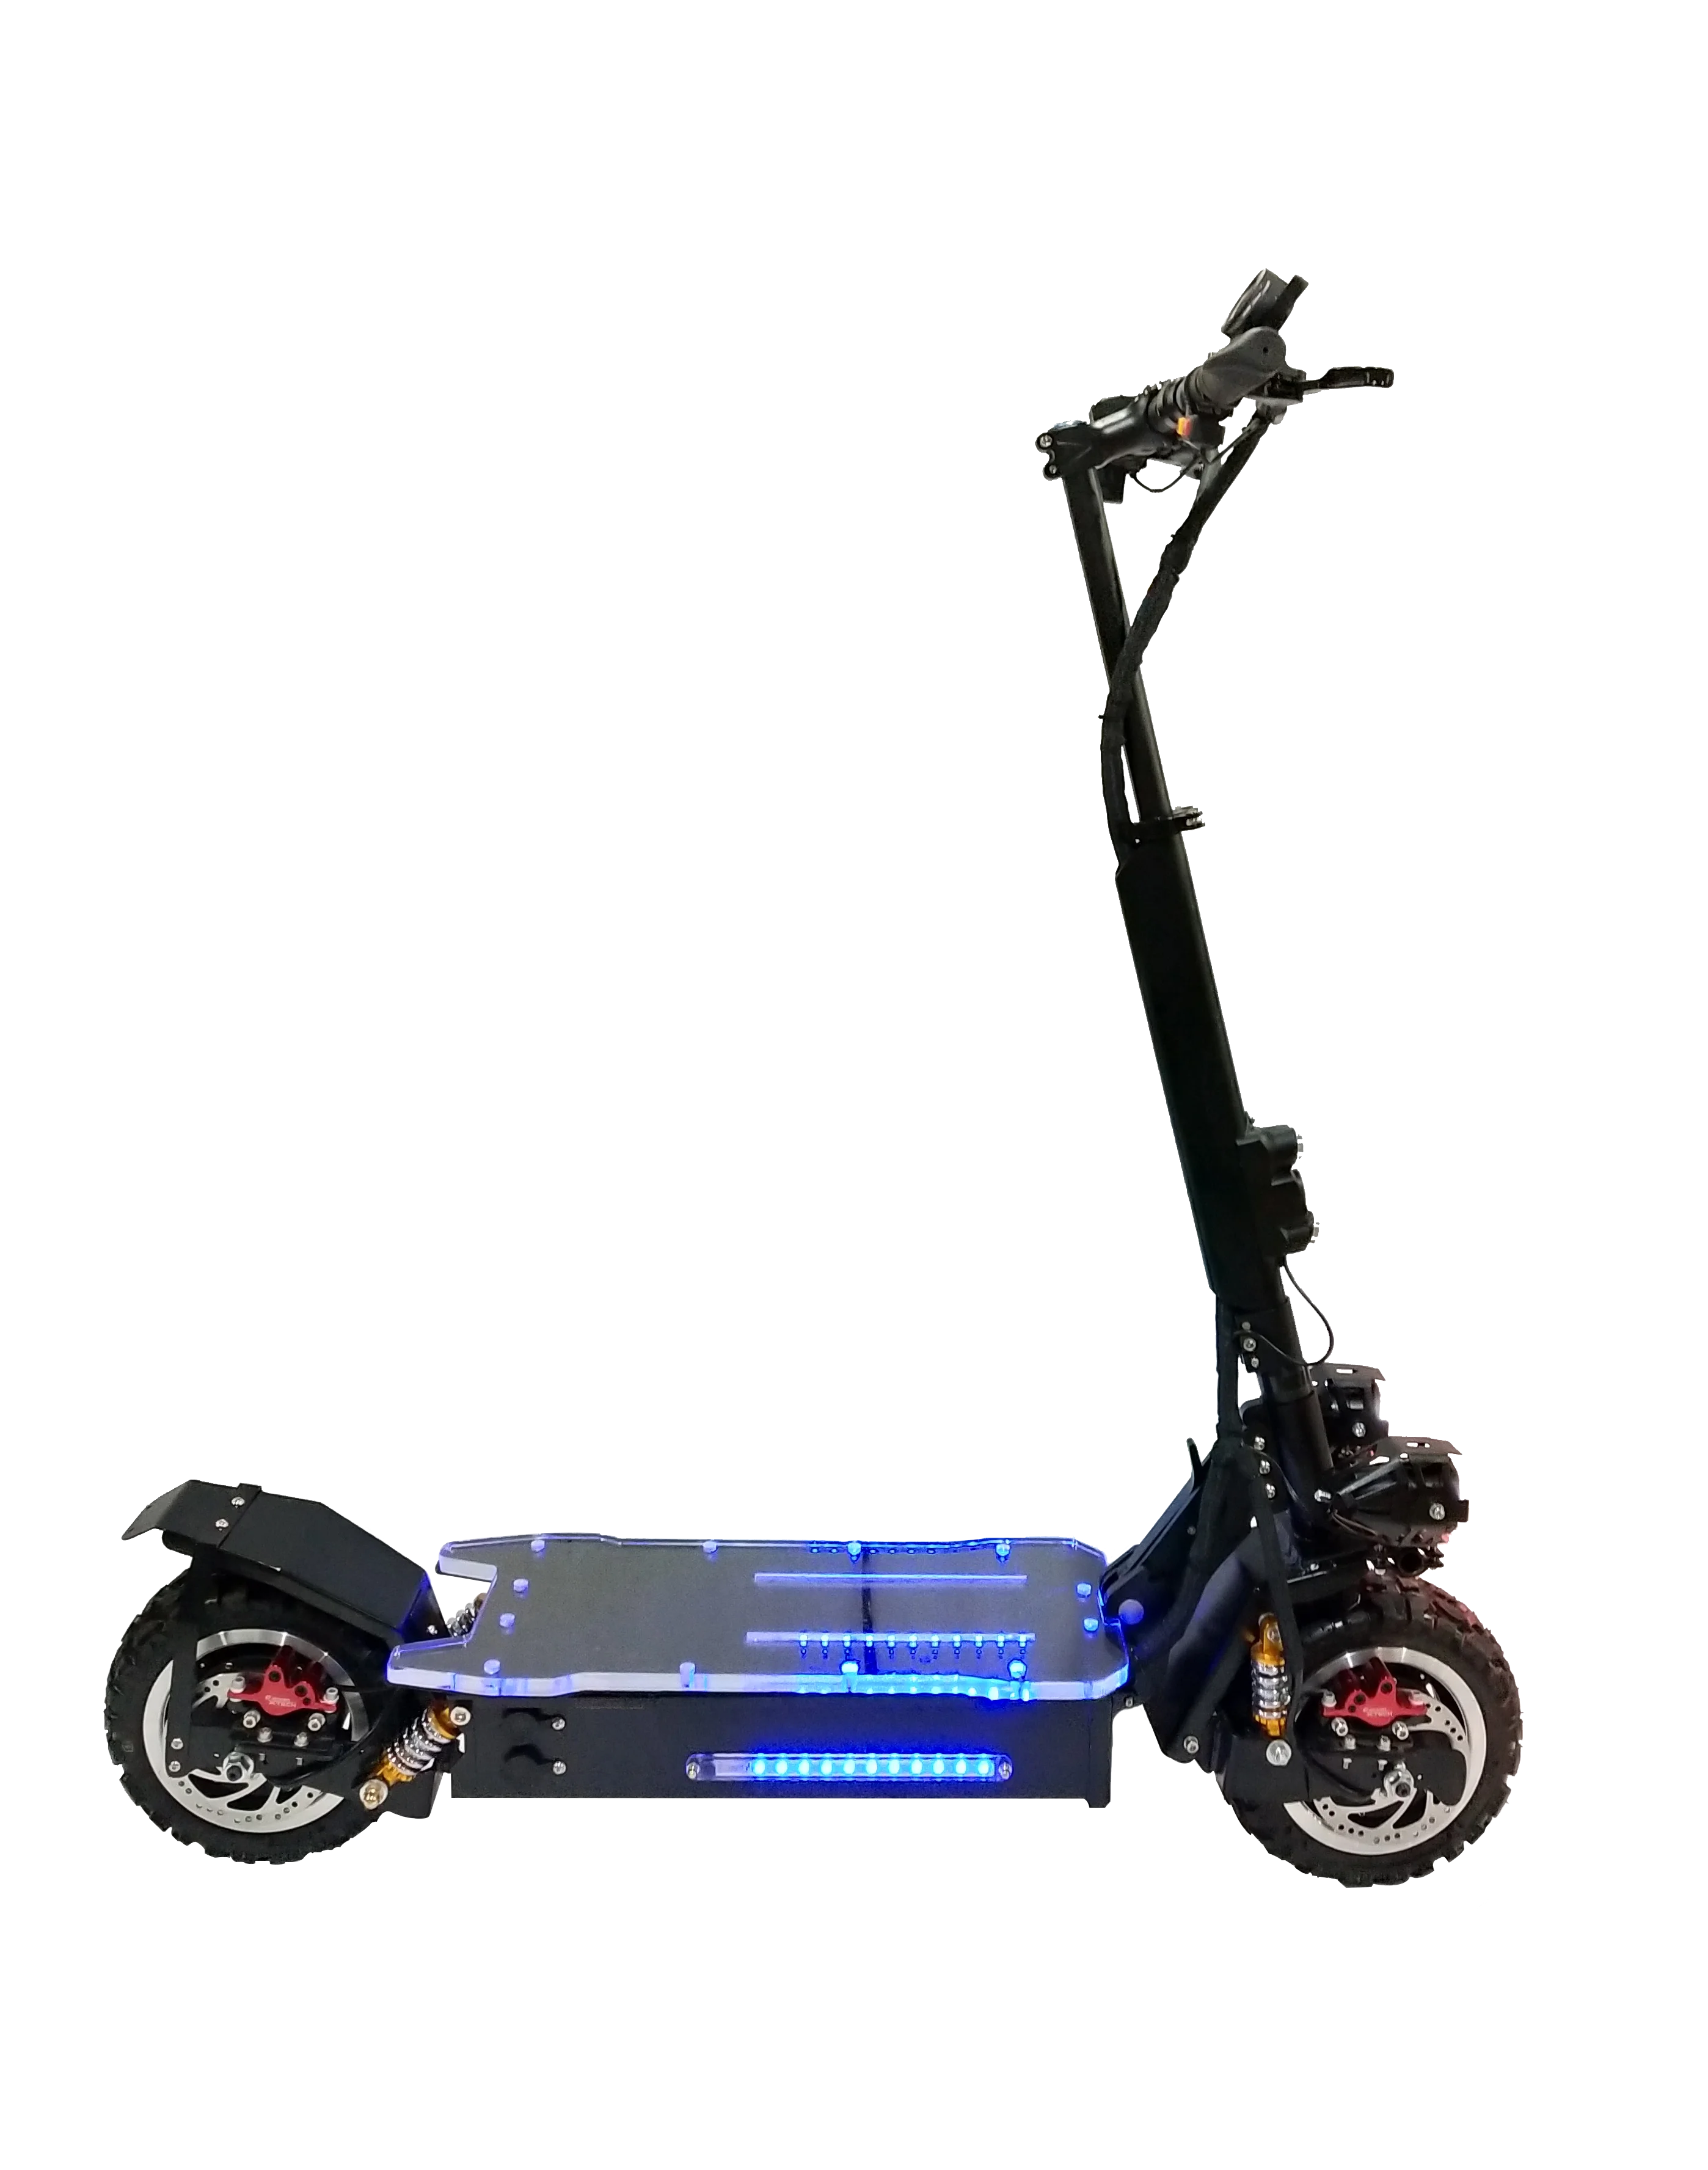 

60V 20A 3200 Watt powerful long distance electric scooter foldable electric golf scooter canned nata de coco, Black